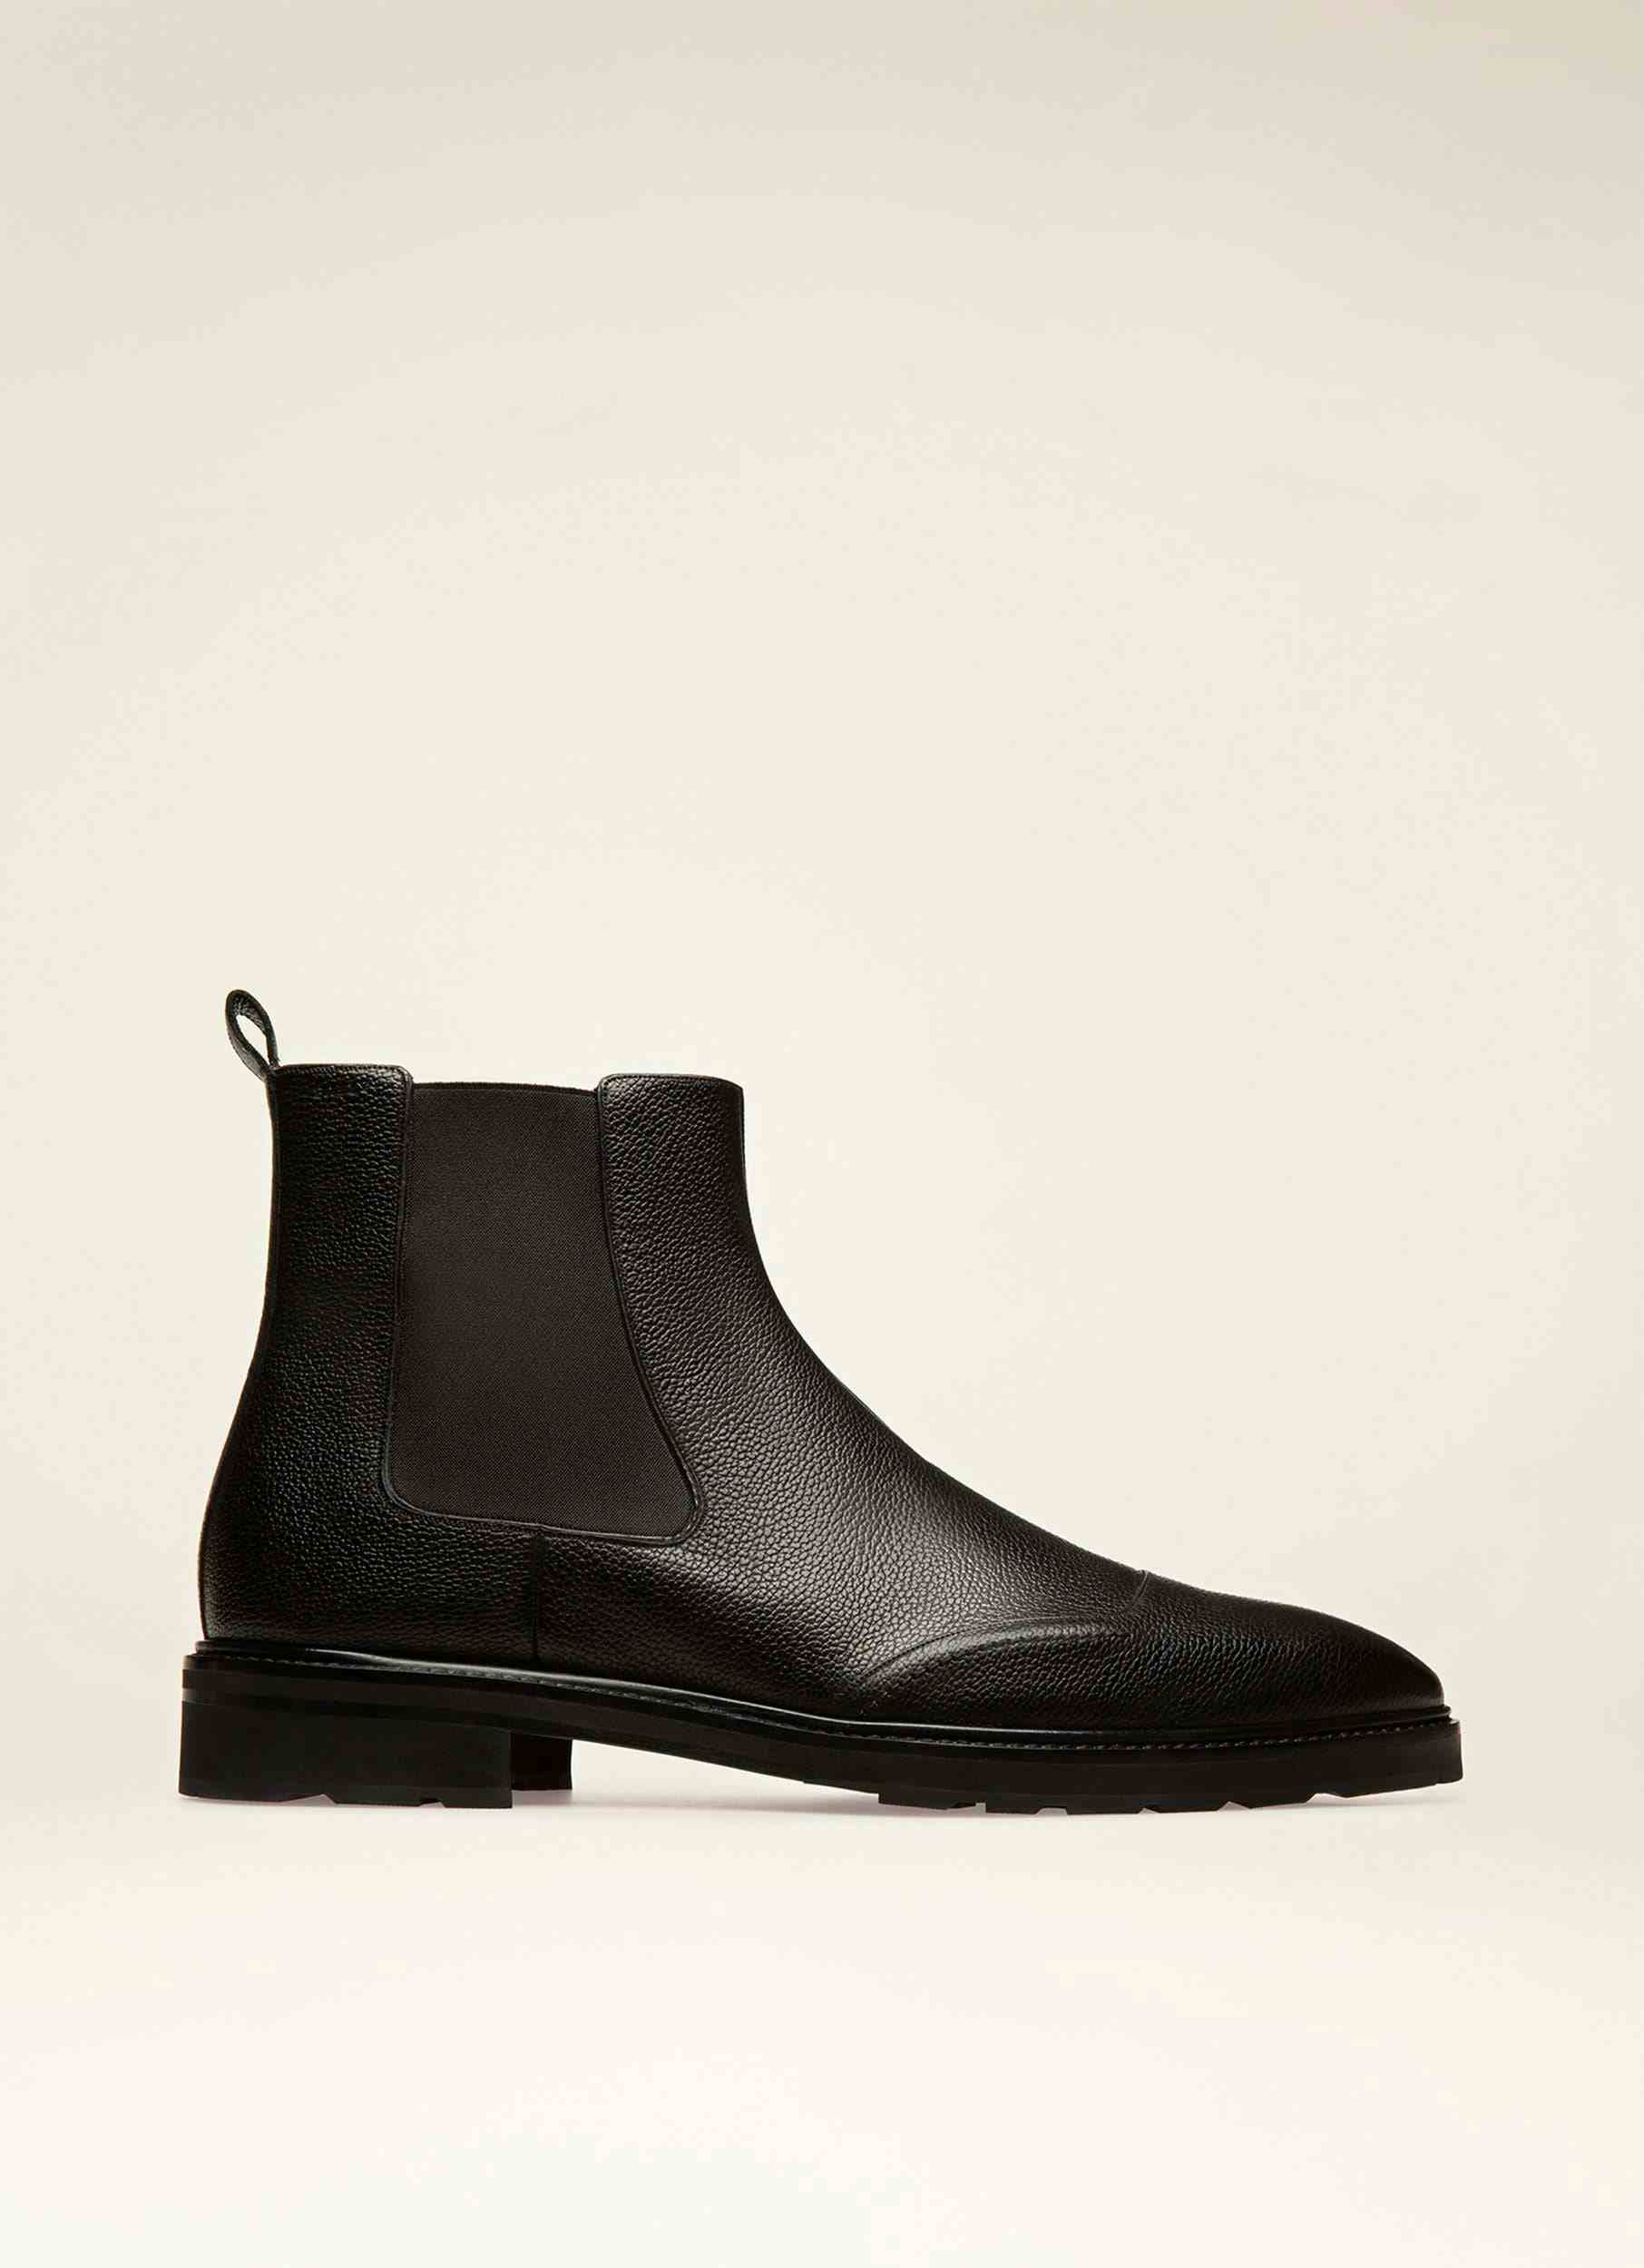 MEYRIN Leather Boots In Black - Men's - Bally